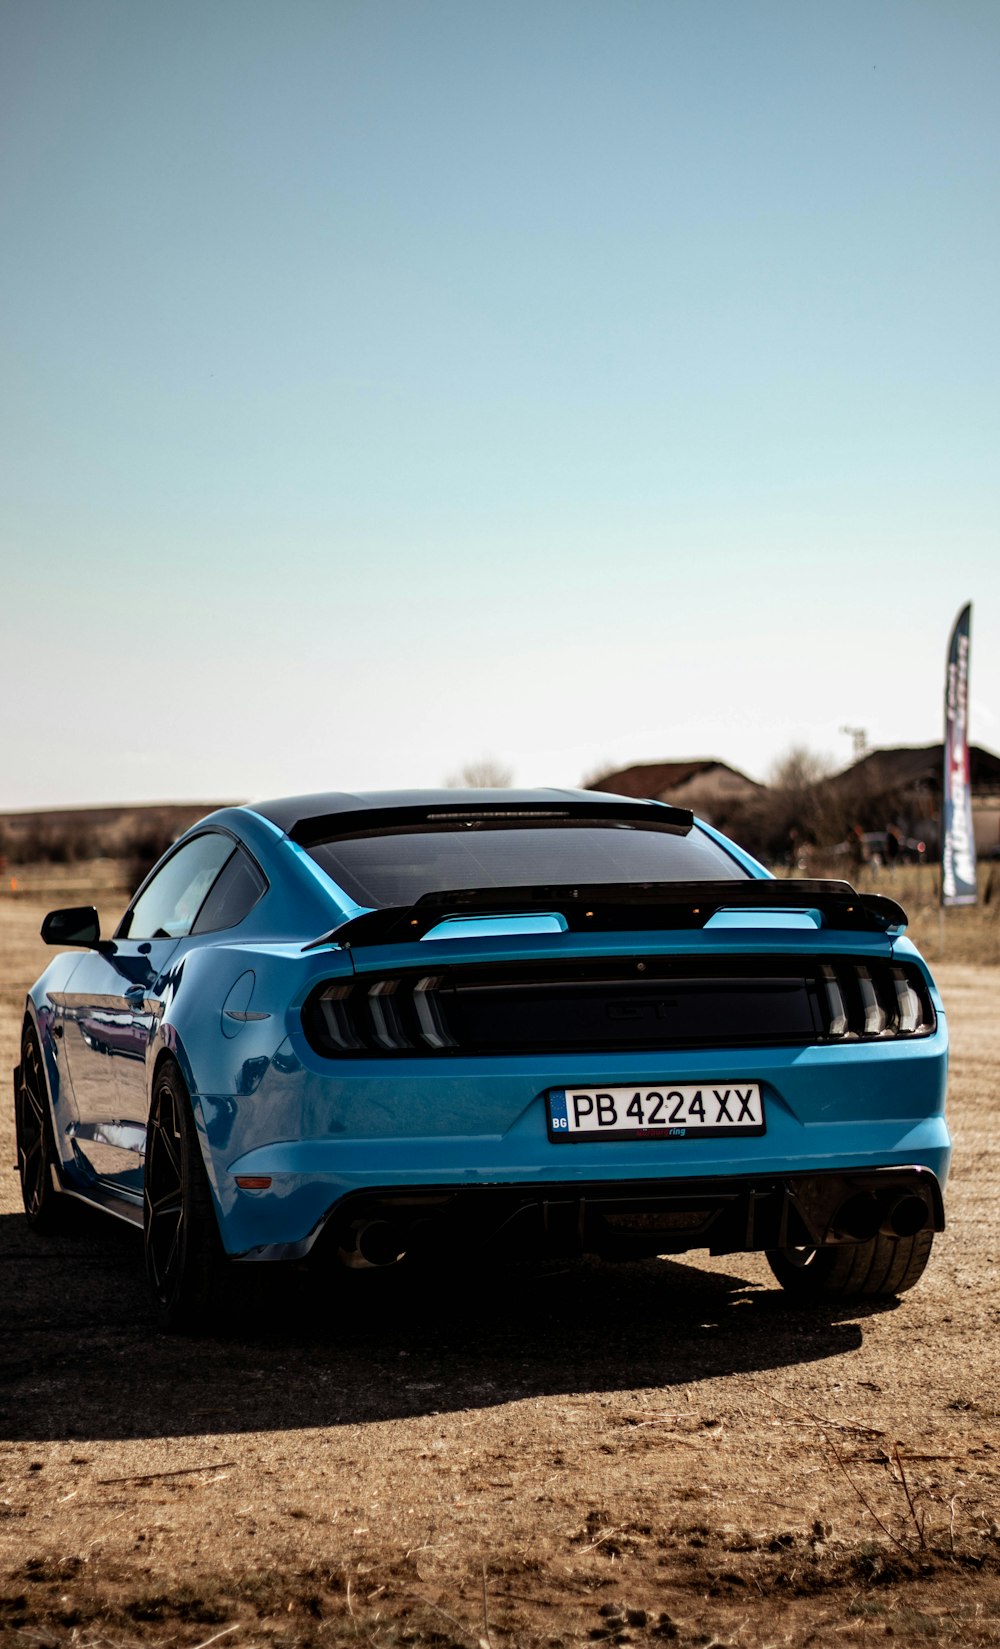 a blue sports car parked in a dirt field